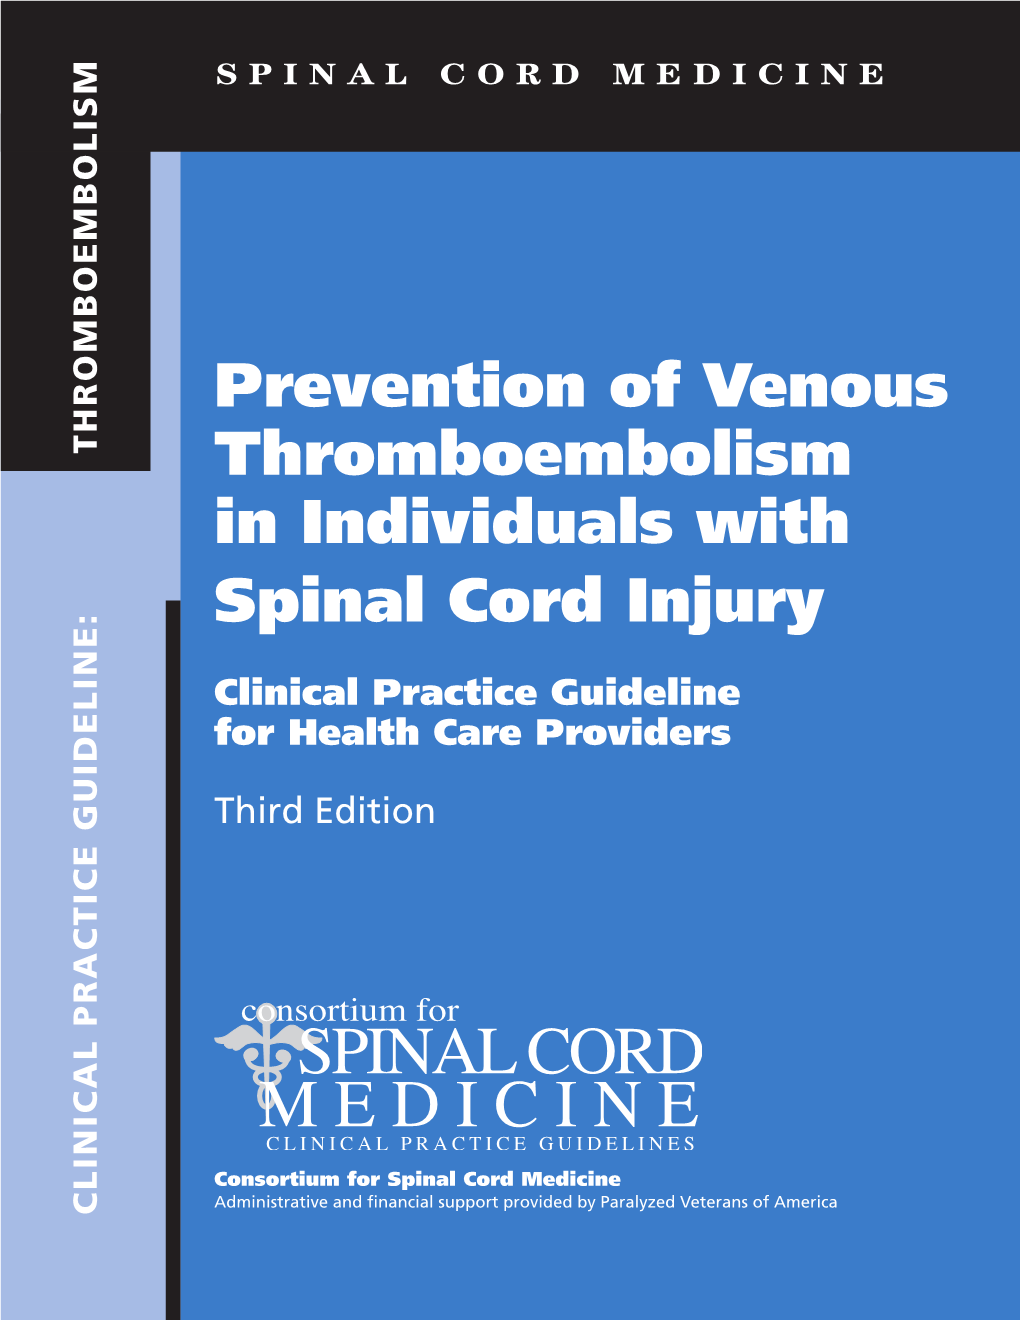 Prevention of Venous Thromboembolism in Individuals with Spinal Cord Injury